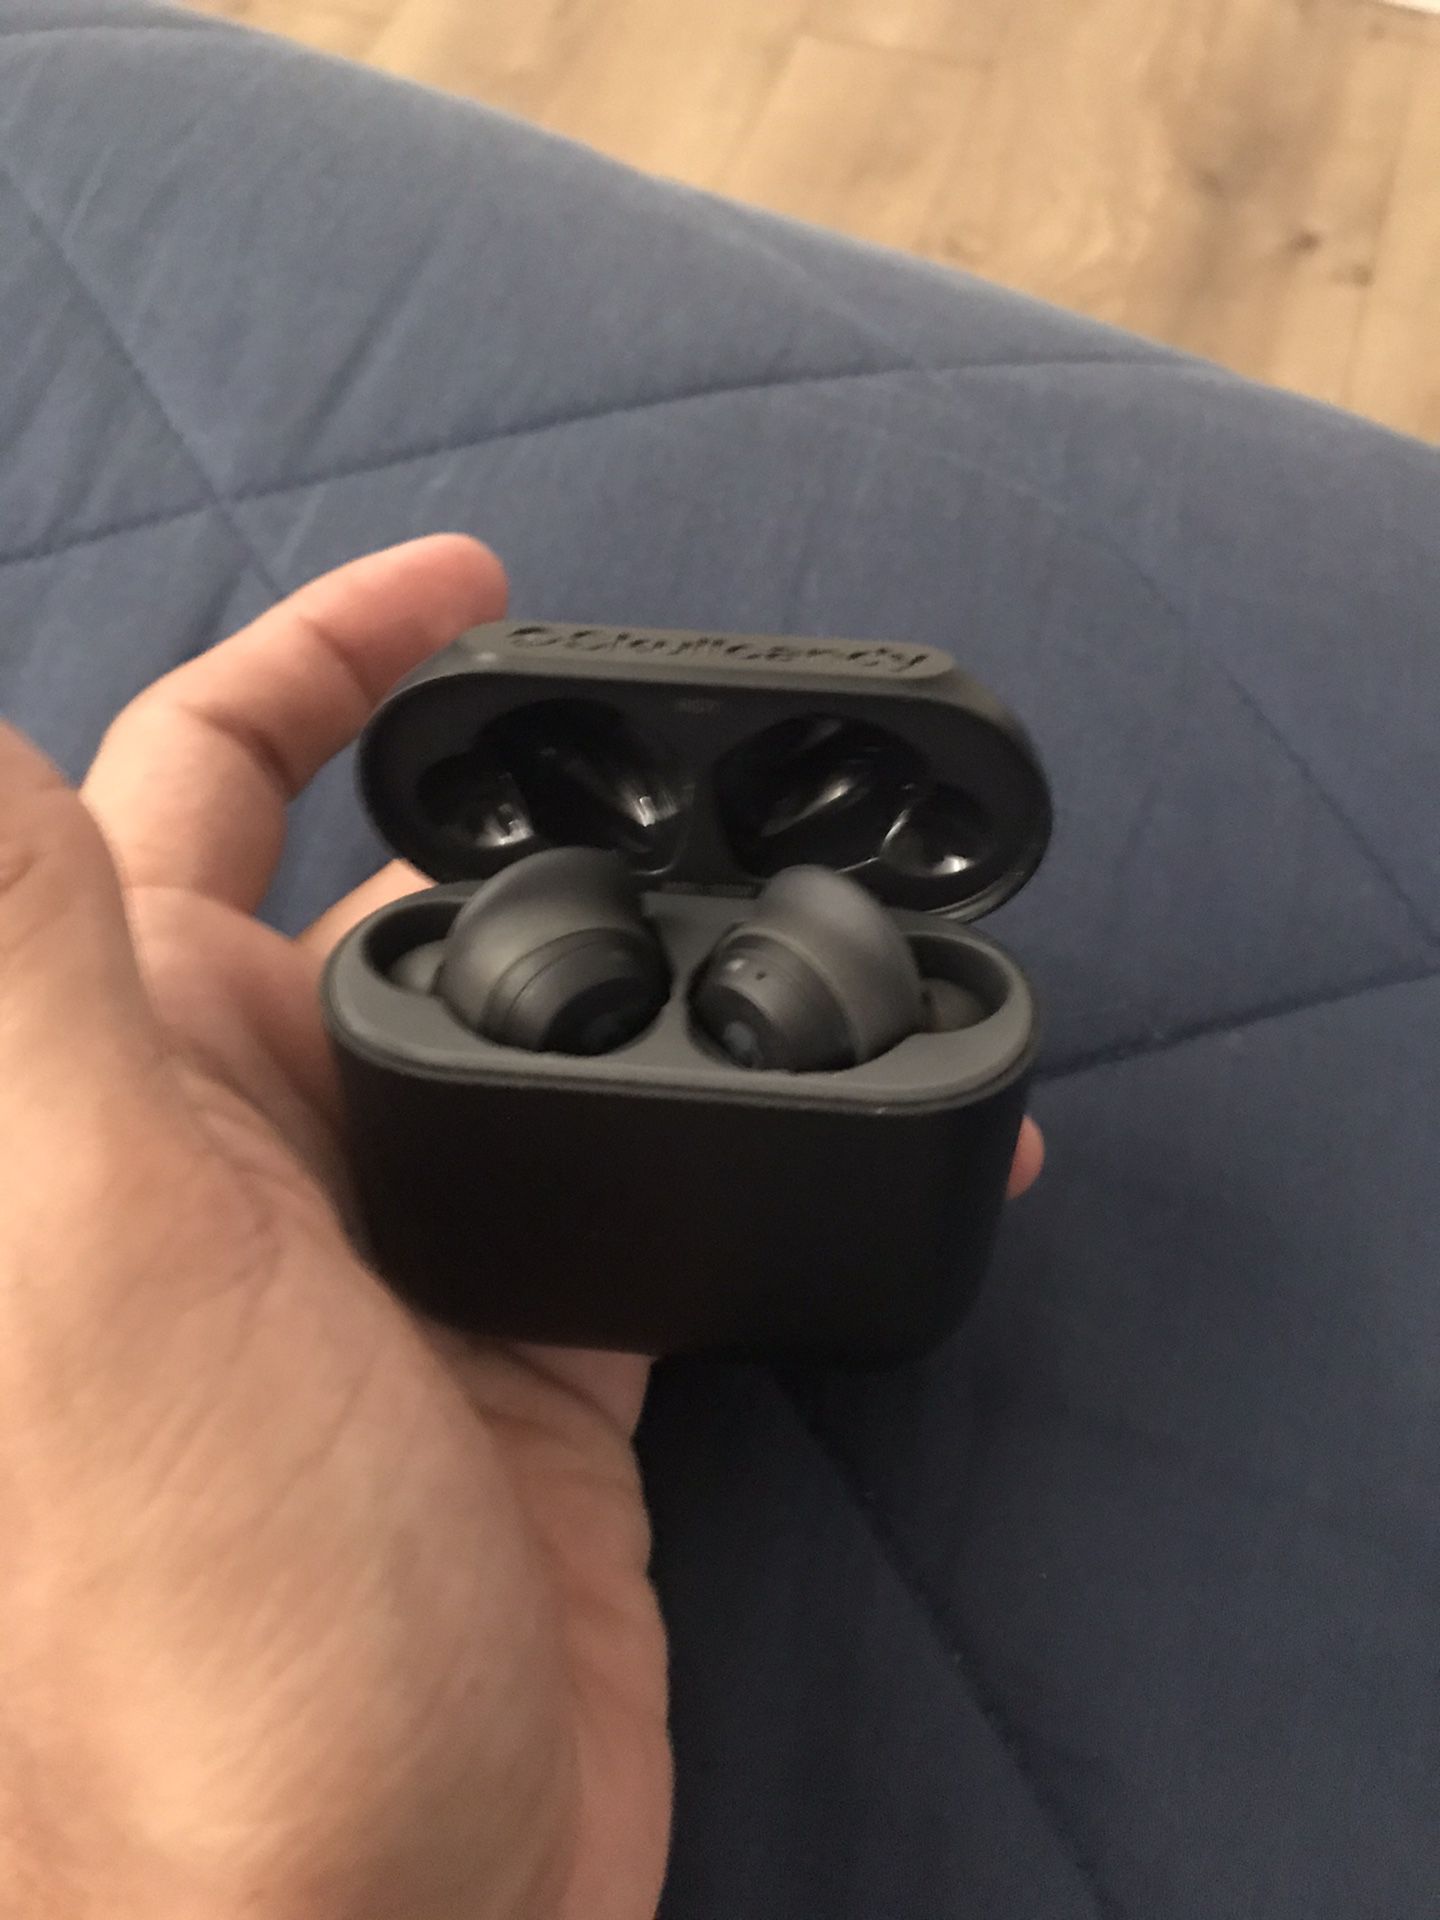 Skull Candy Indy Wireless Earbuds